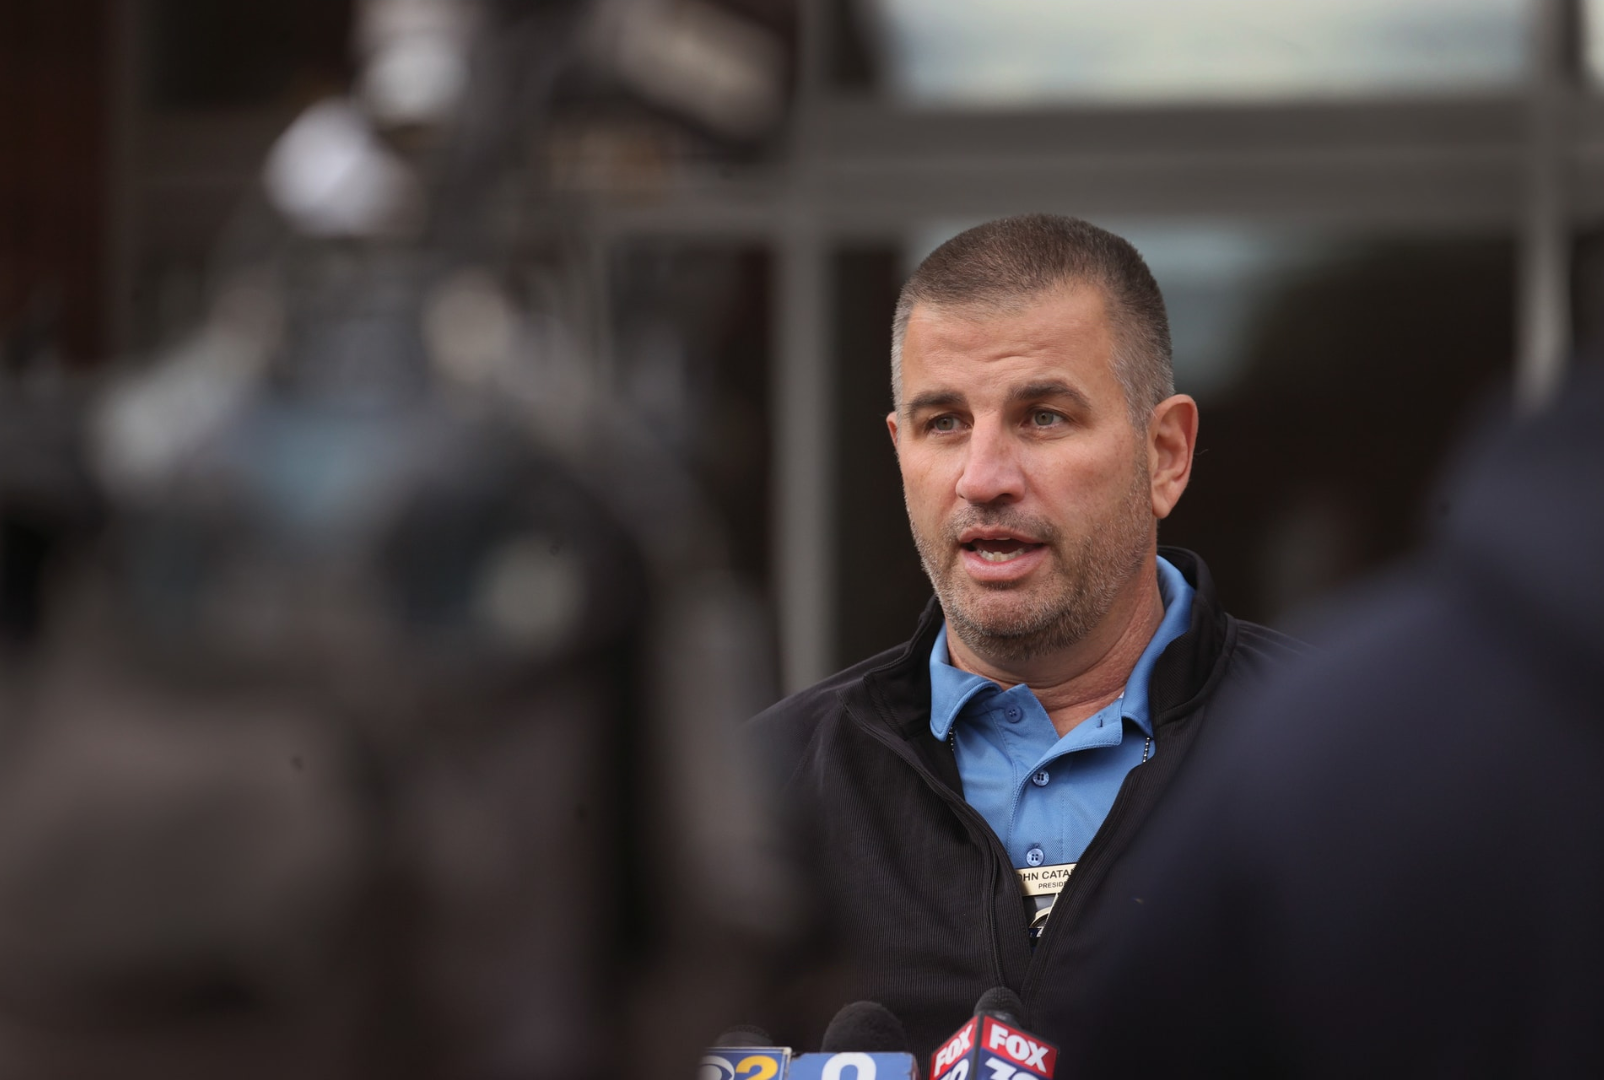 FOP President John Catanzara intends to retire from Chicago Police force Tuesday morning